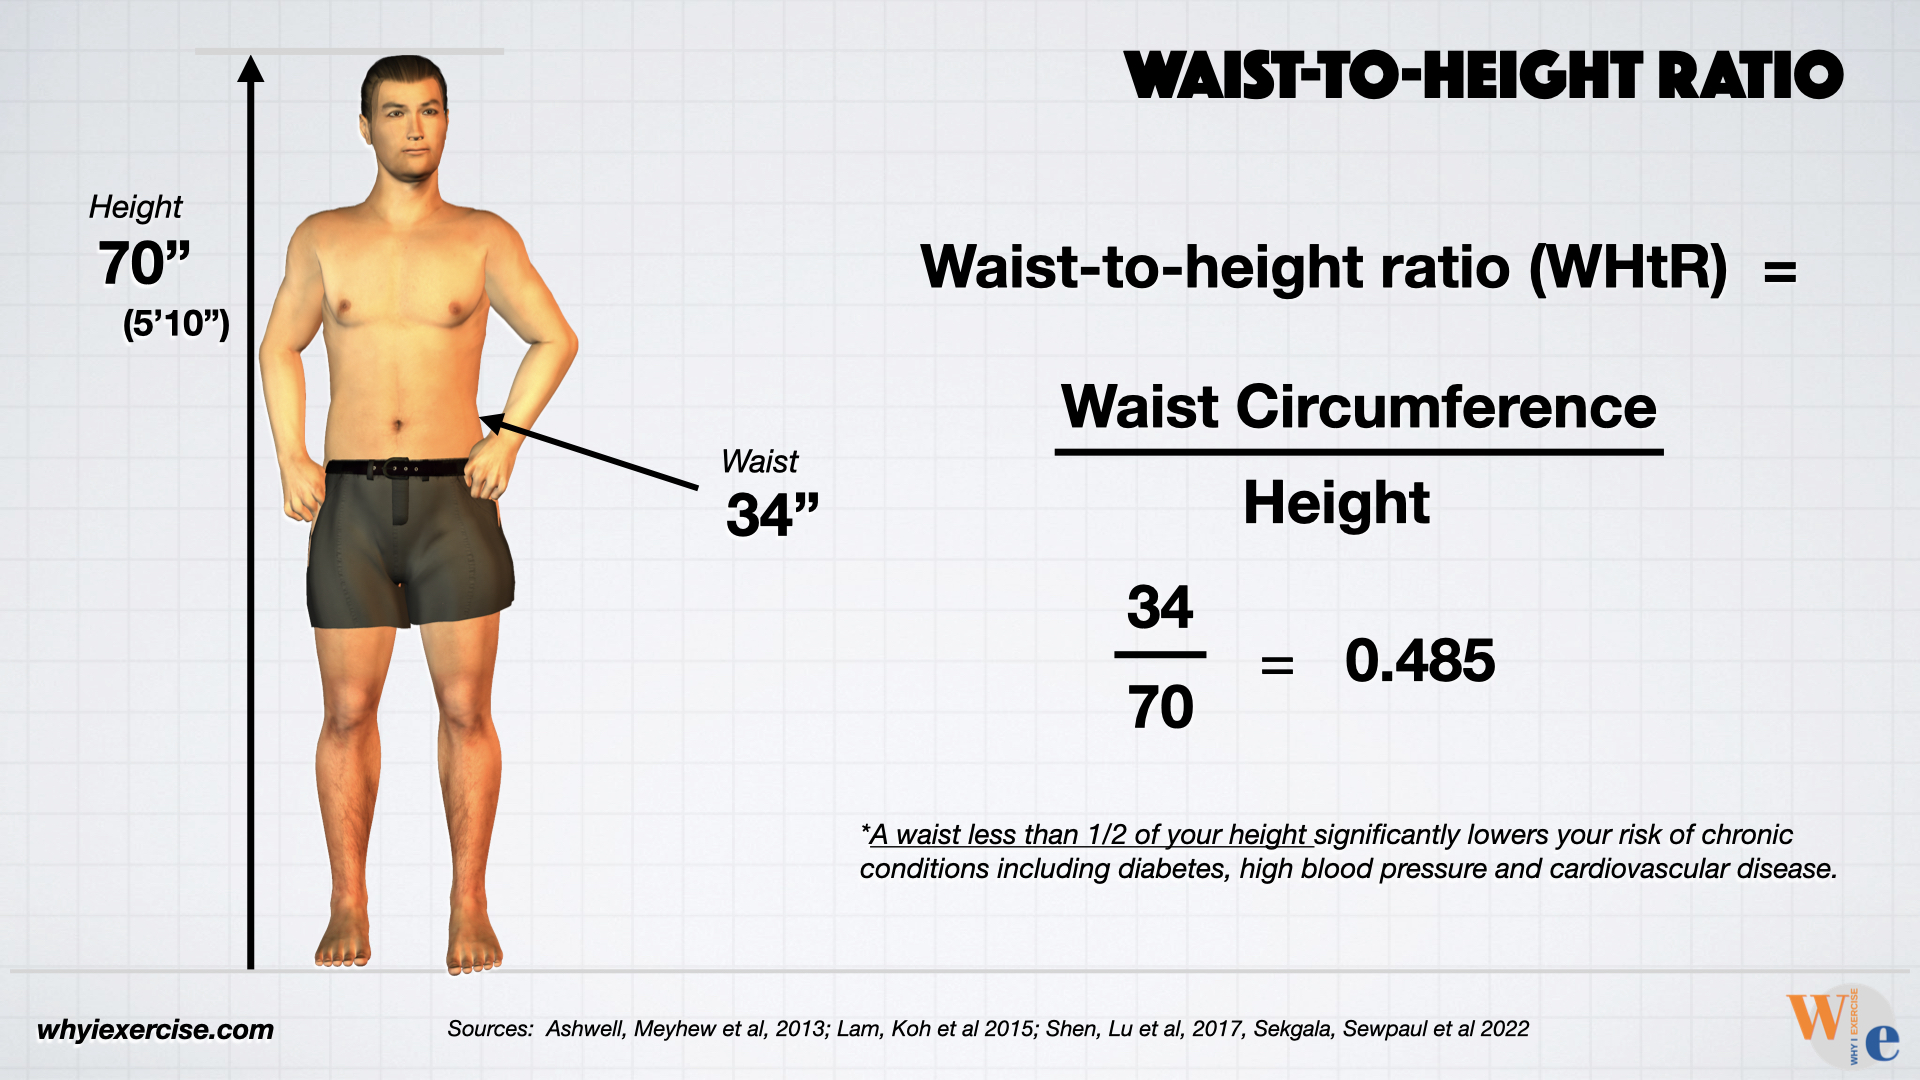 Waist circumference and waist-to-height ratio guidelines